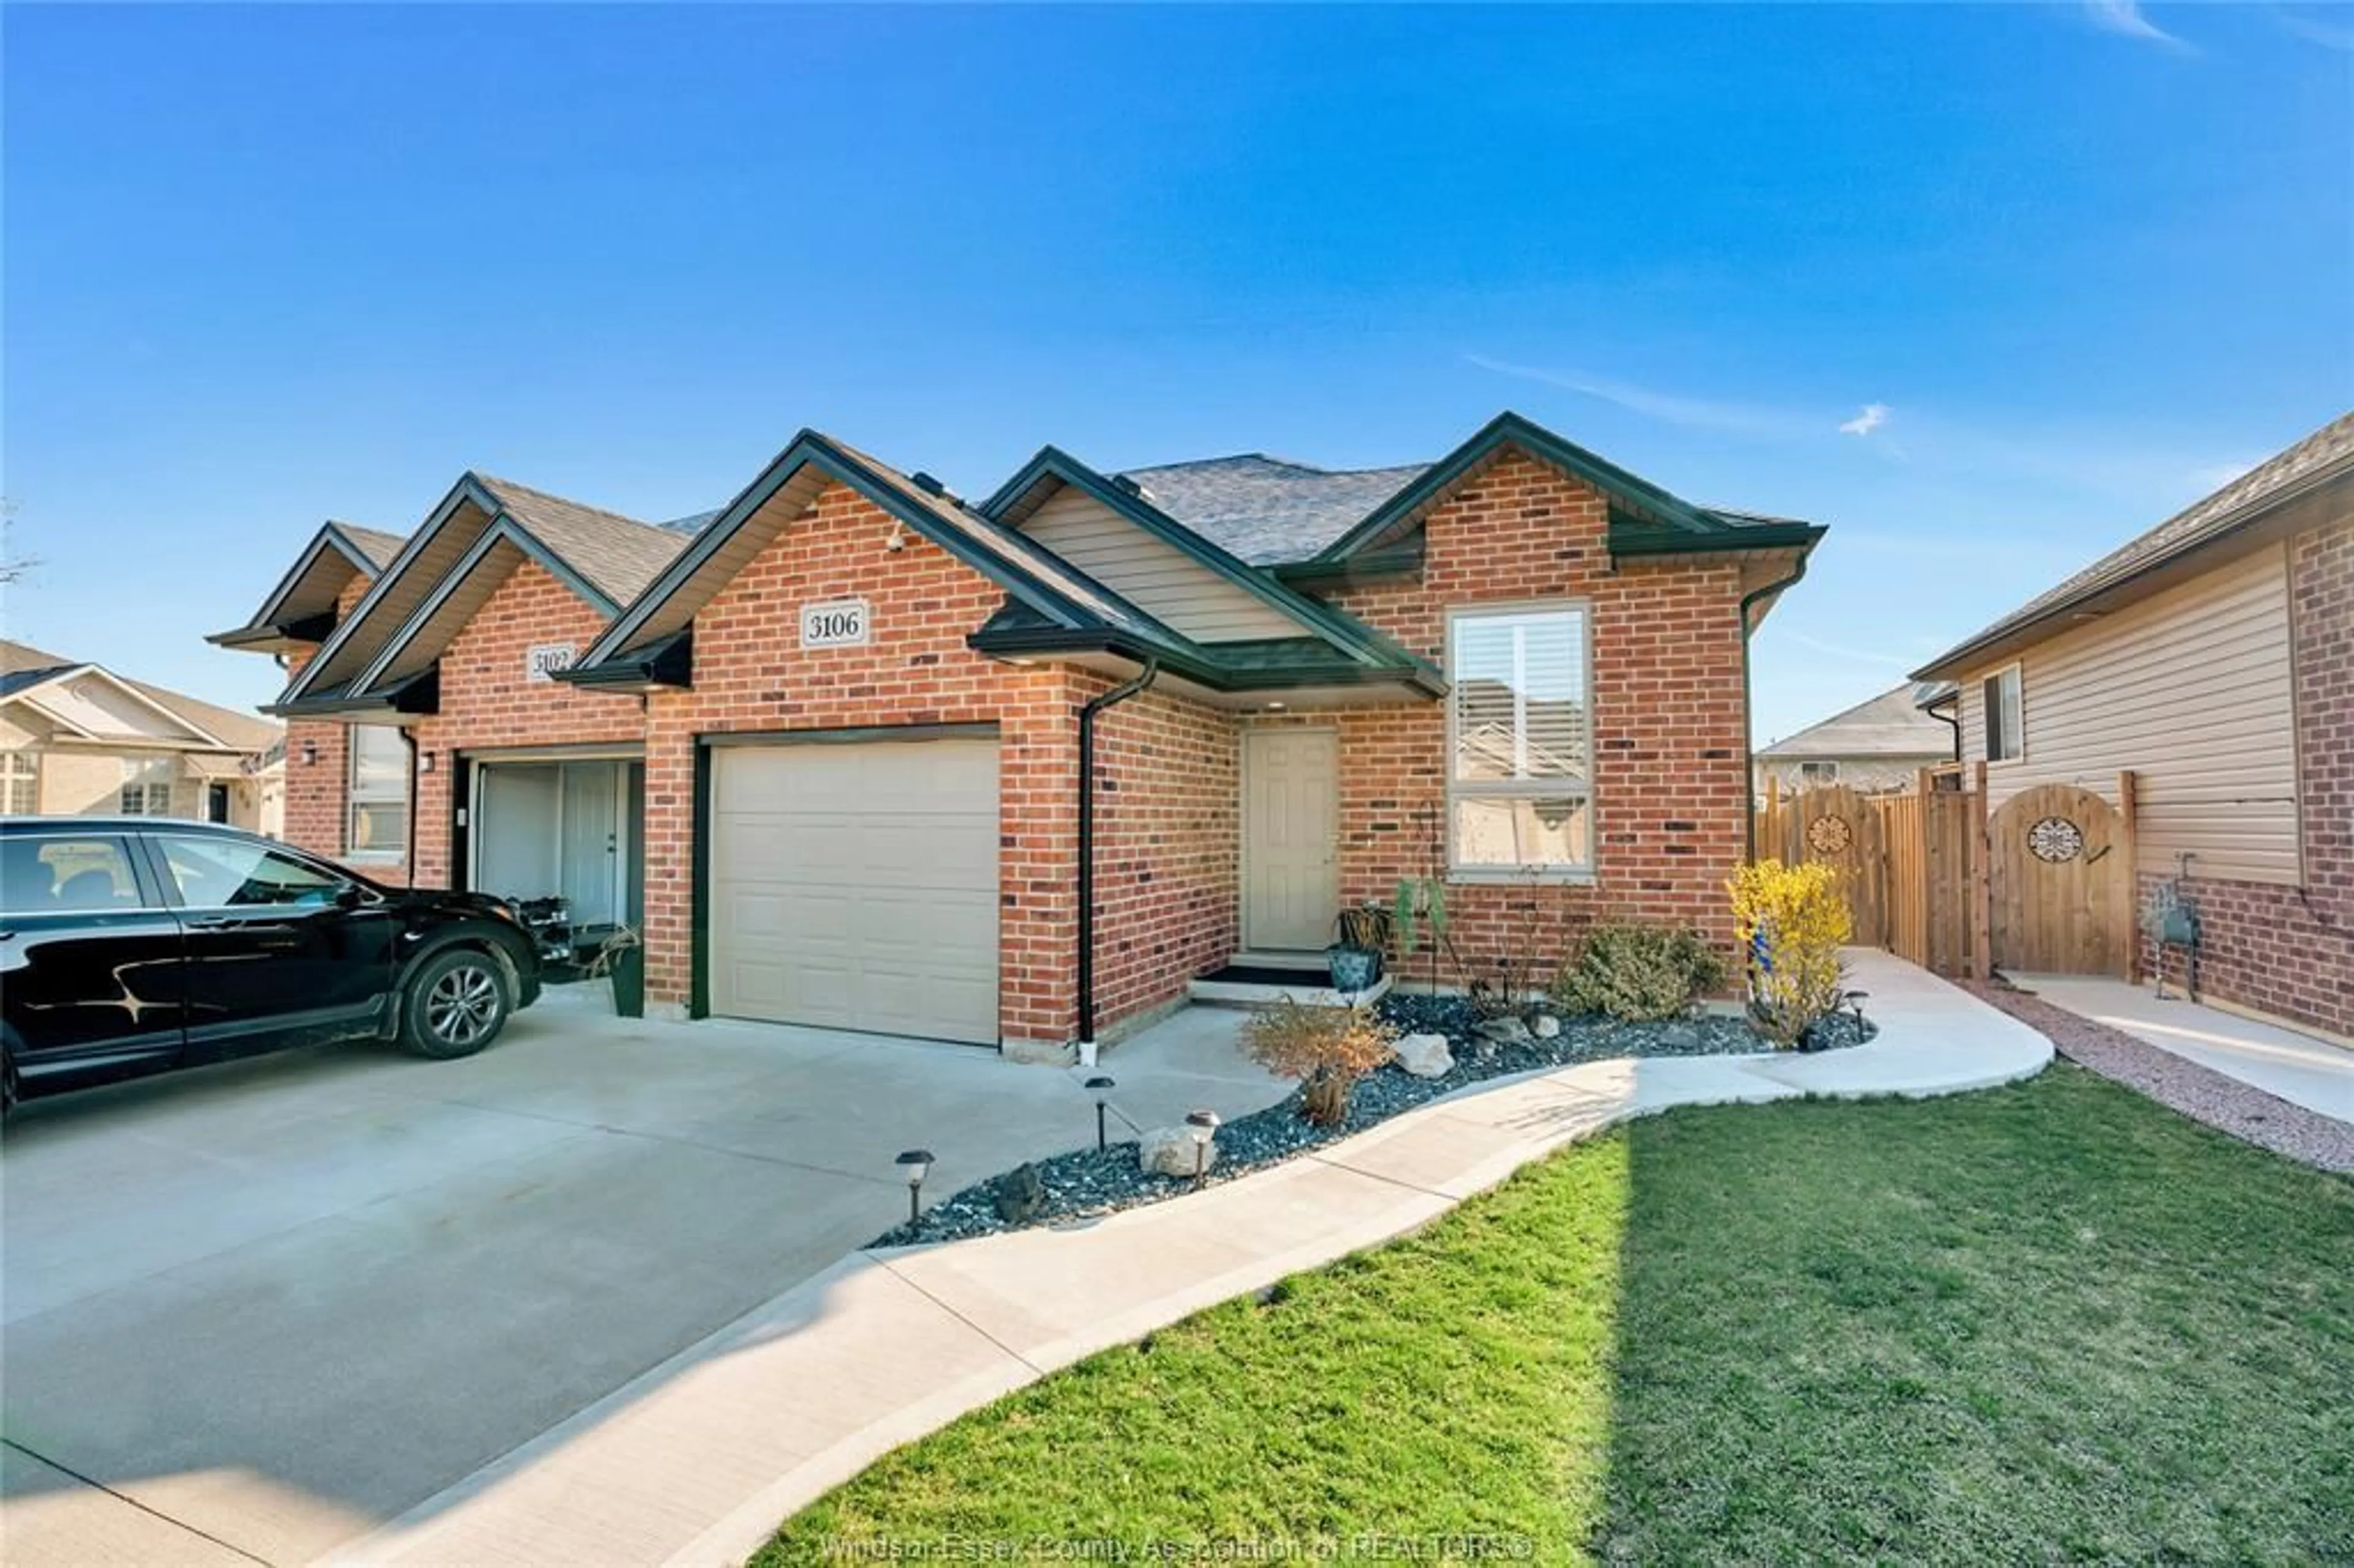 Home with brick exterior material for 3106 VIOLA Cres, Windsor Ontario N8N 0A1